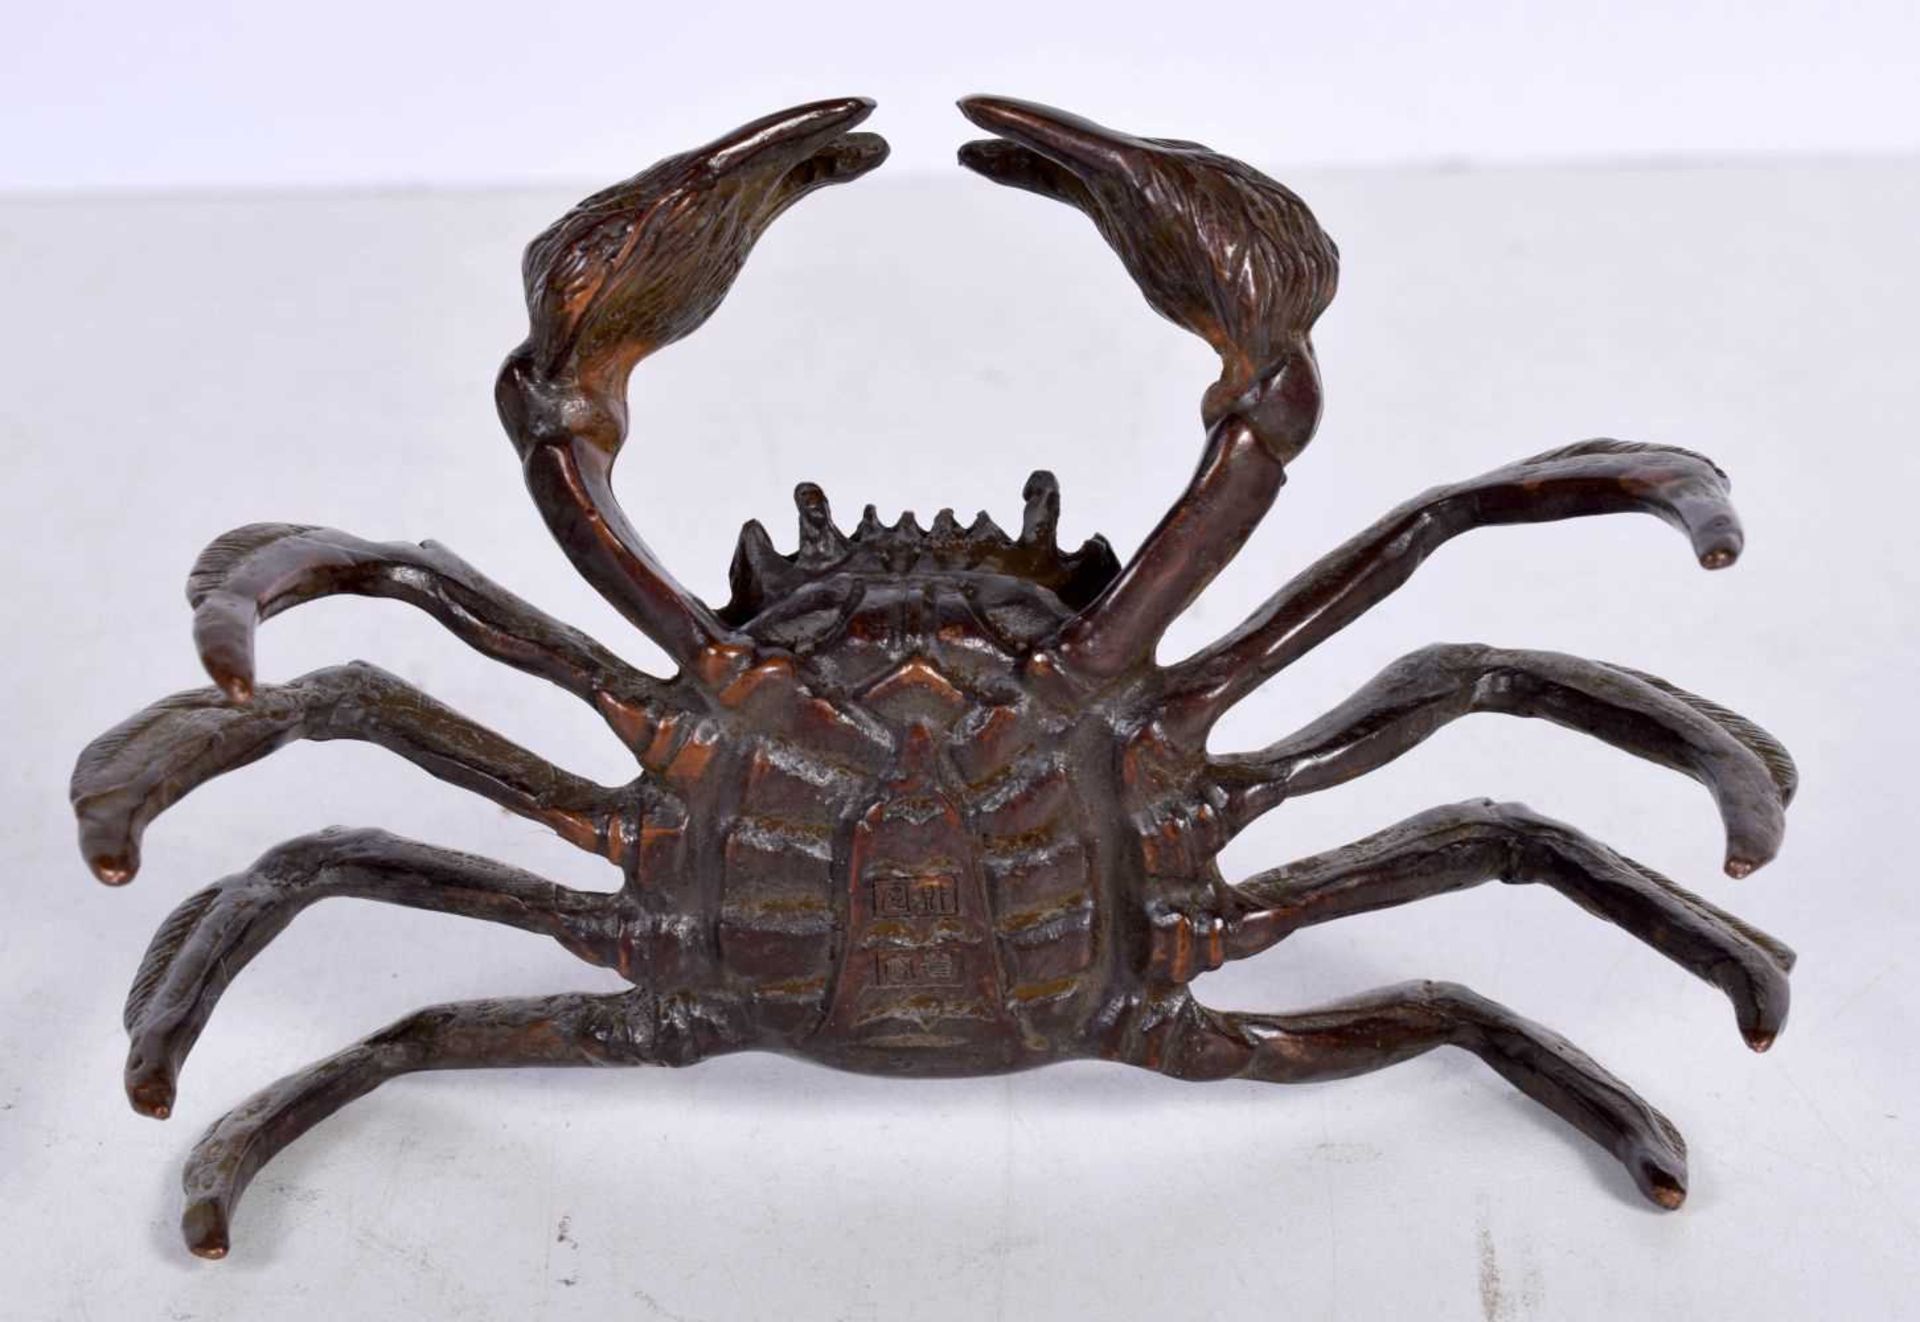 A Large Japanese Bronze Model of a Crab. 11.6cm x 7.1cm x 4.8cm, weight 242g - Image 3 of 3